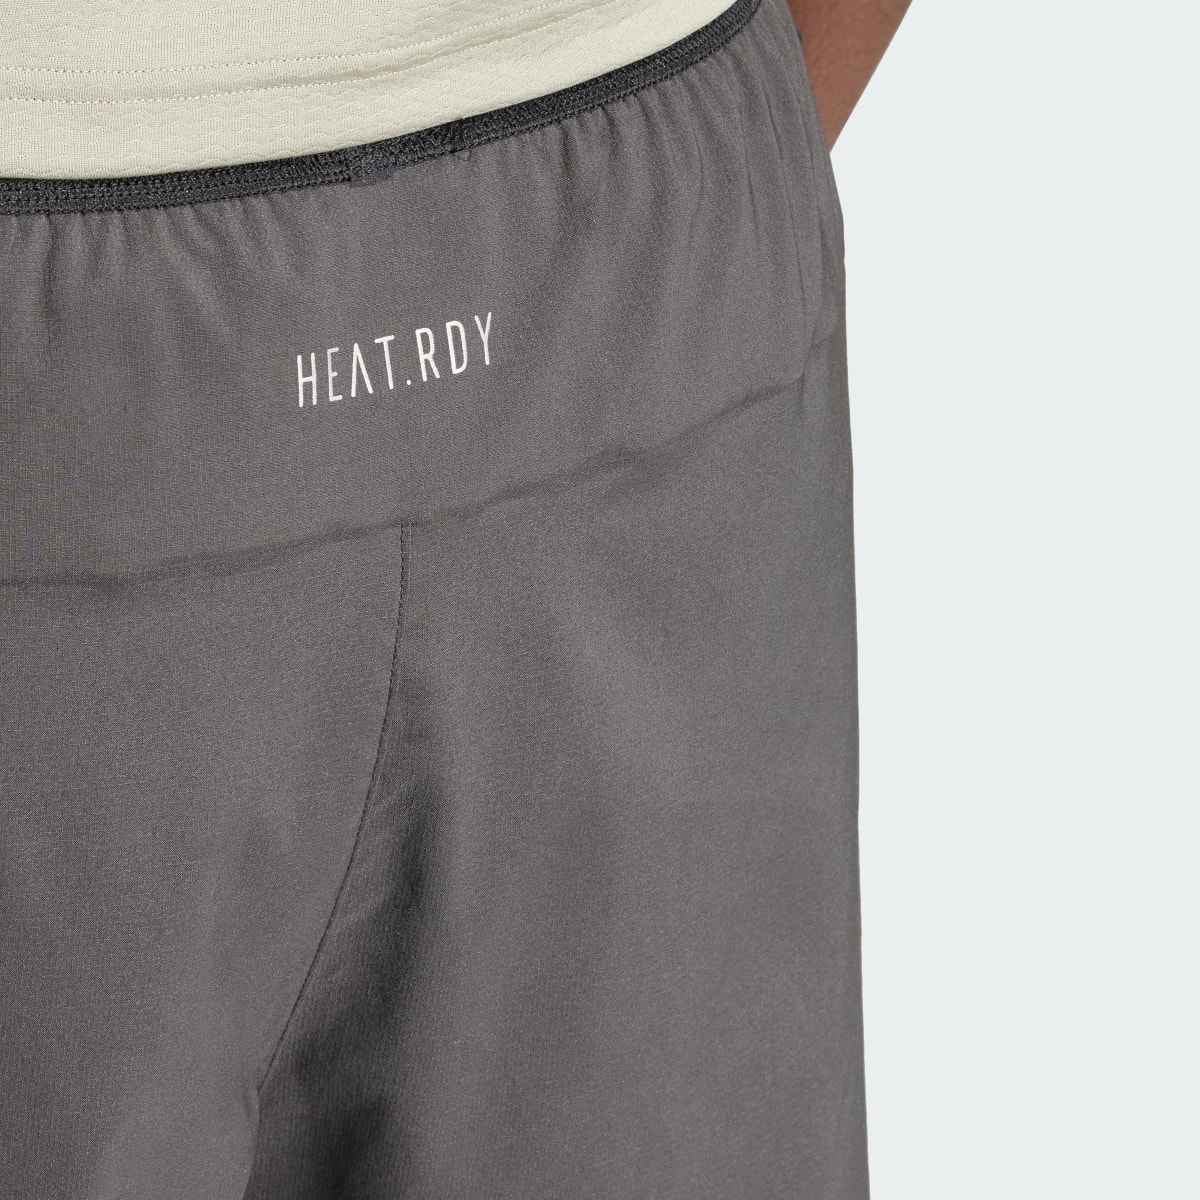 Adidas HIIT Workout HEAT.RDY 2-in-1 Shorts. 6